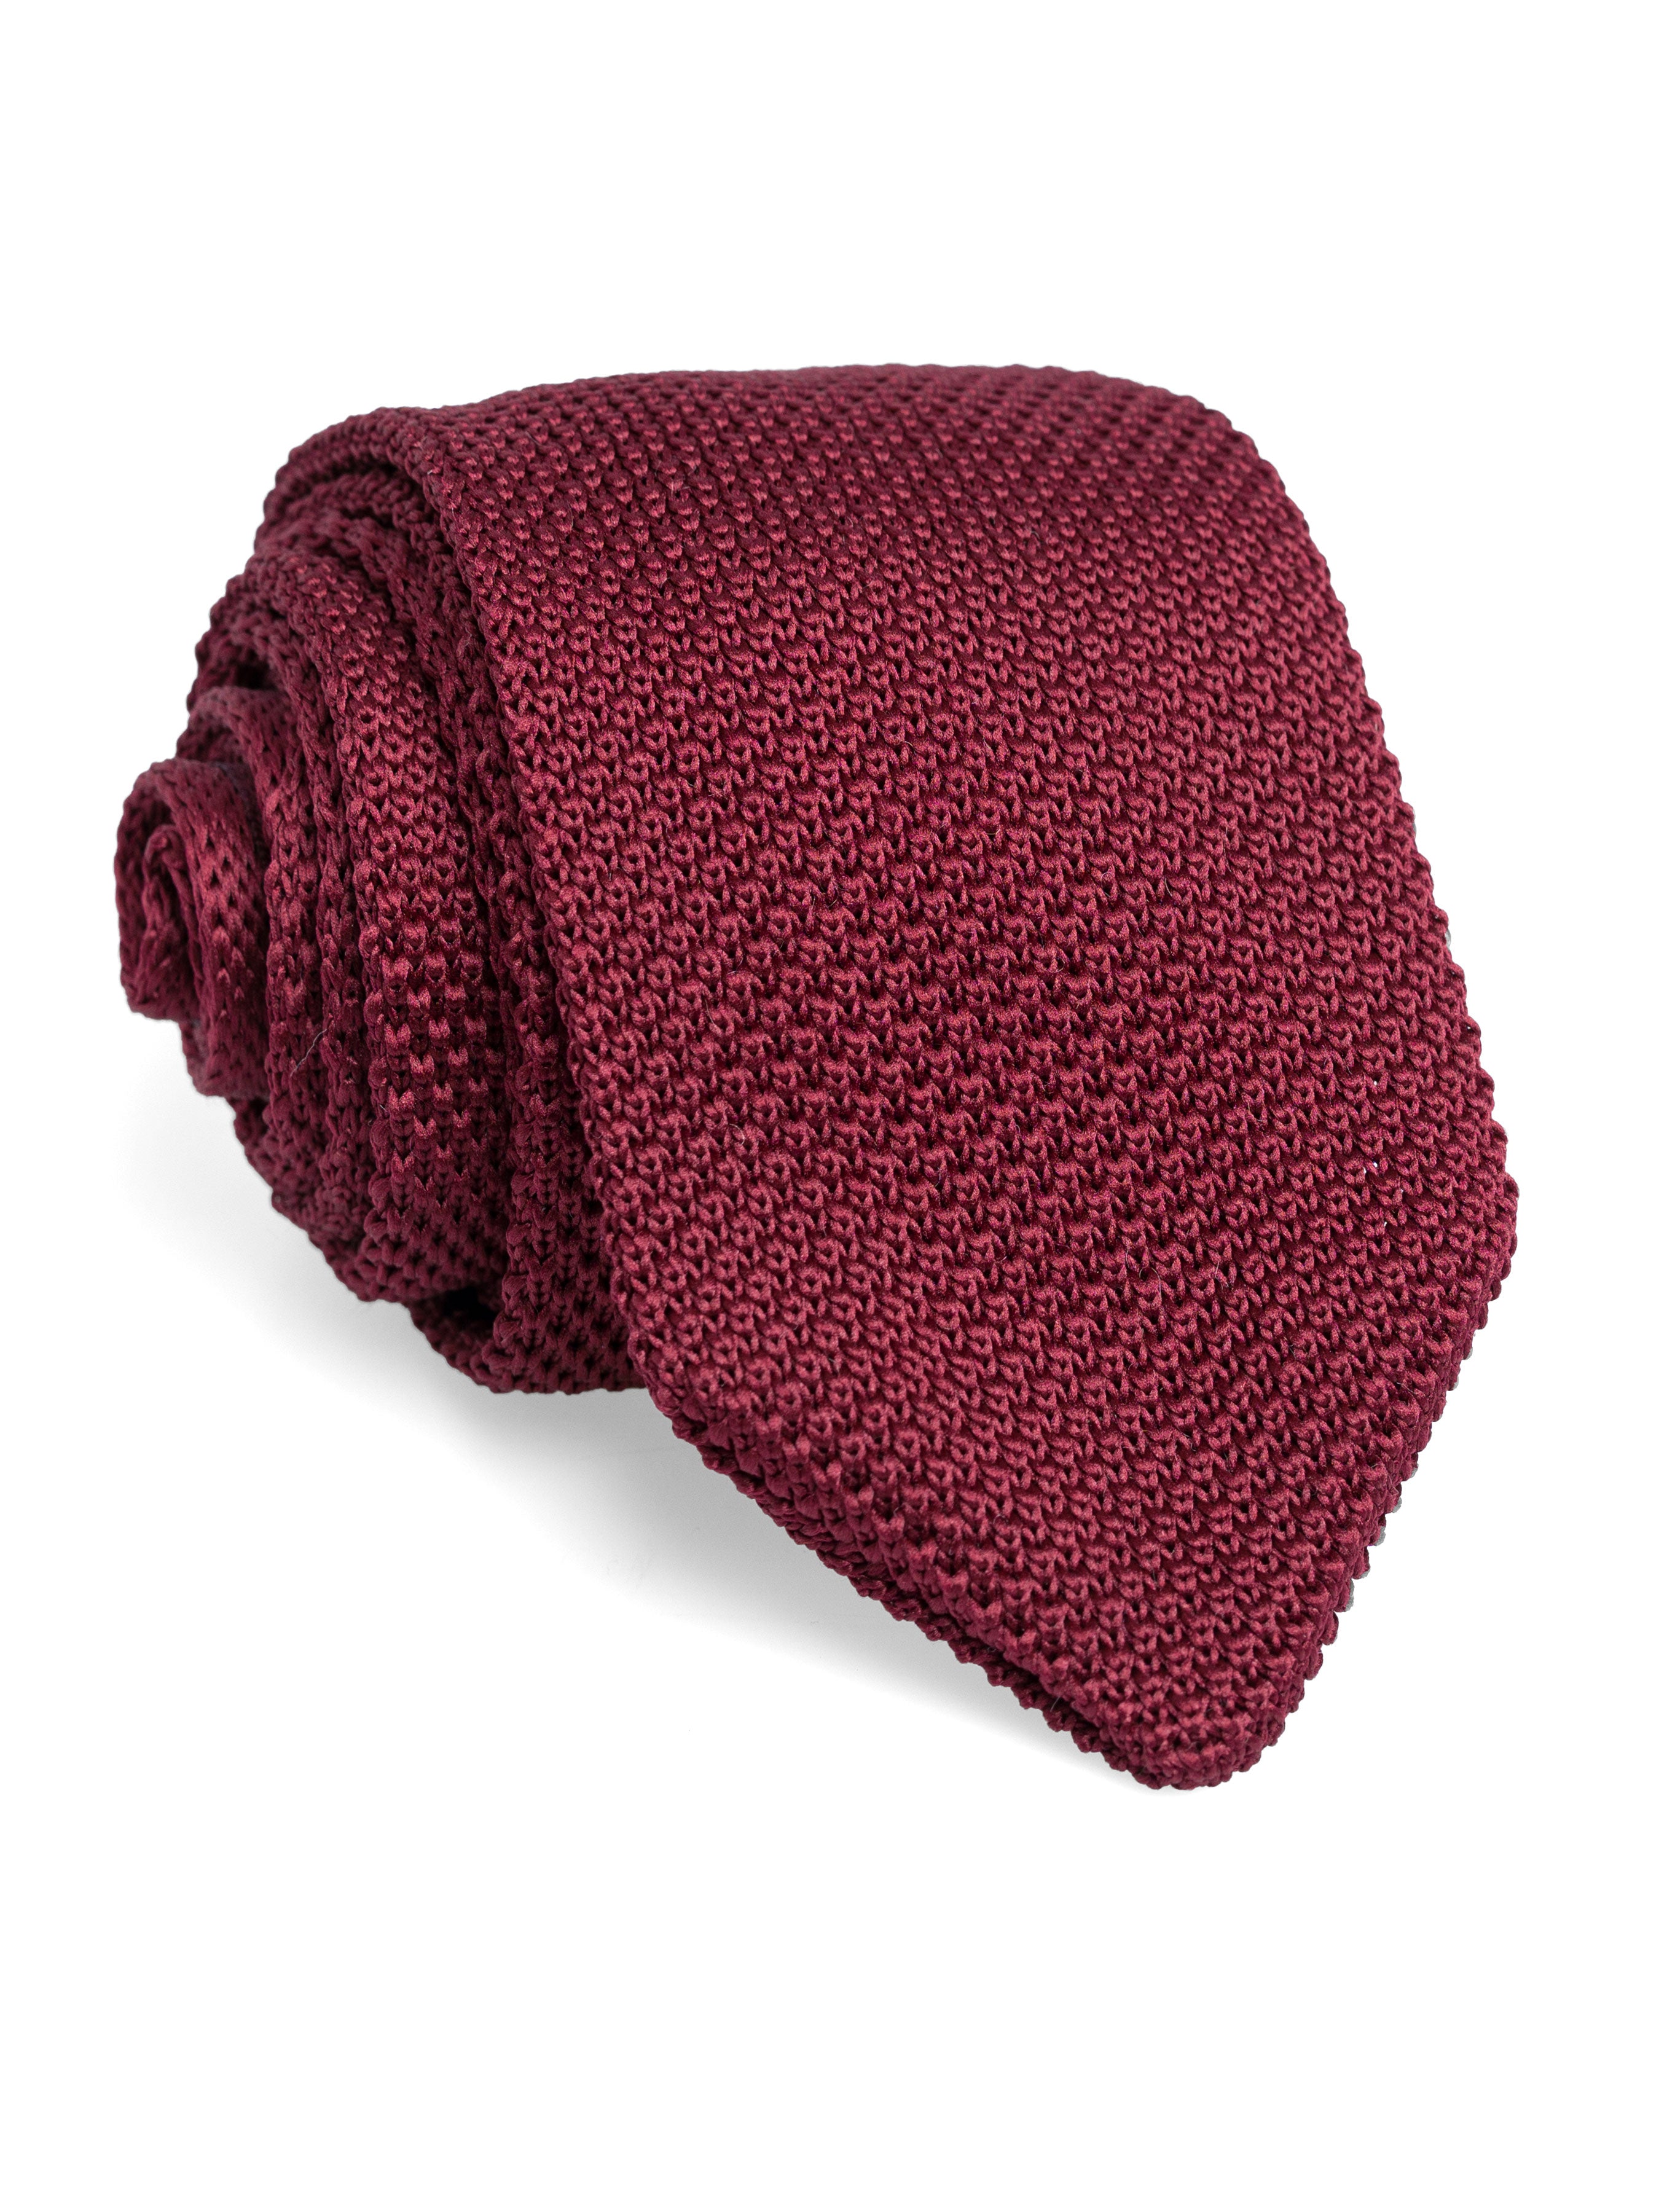 Knit Tie - Red Burgundy - Zeve Shoes